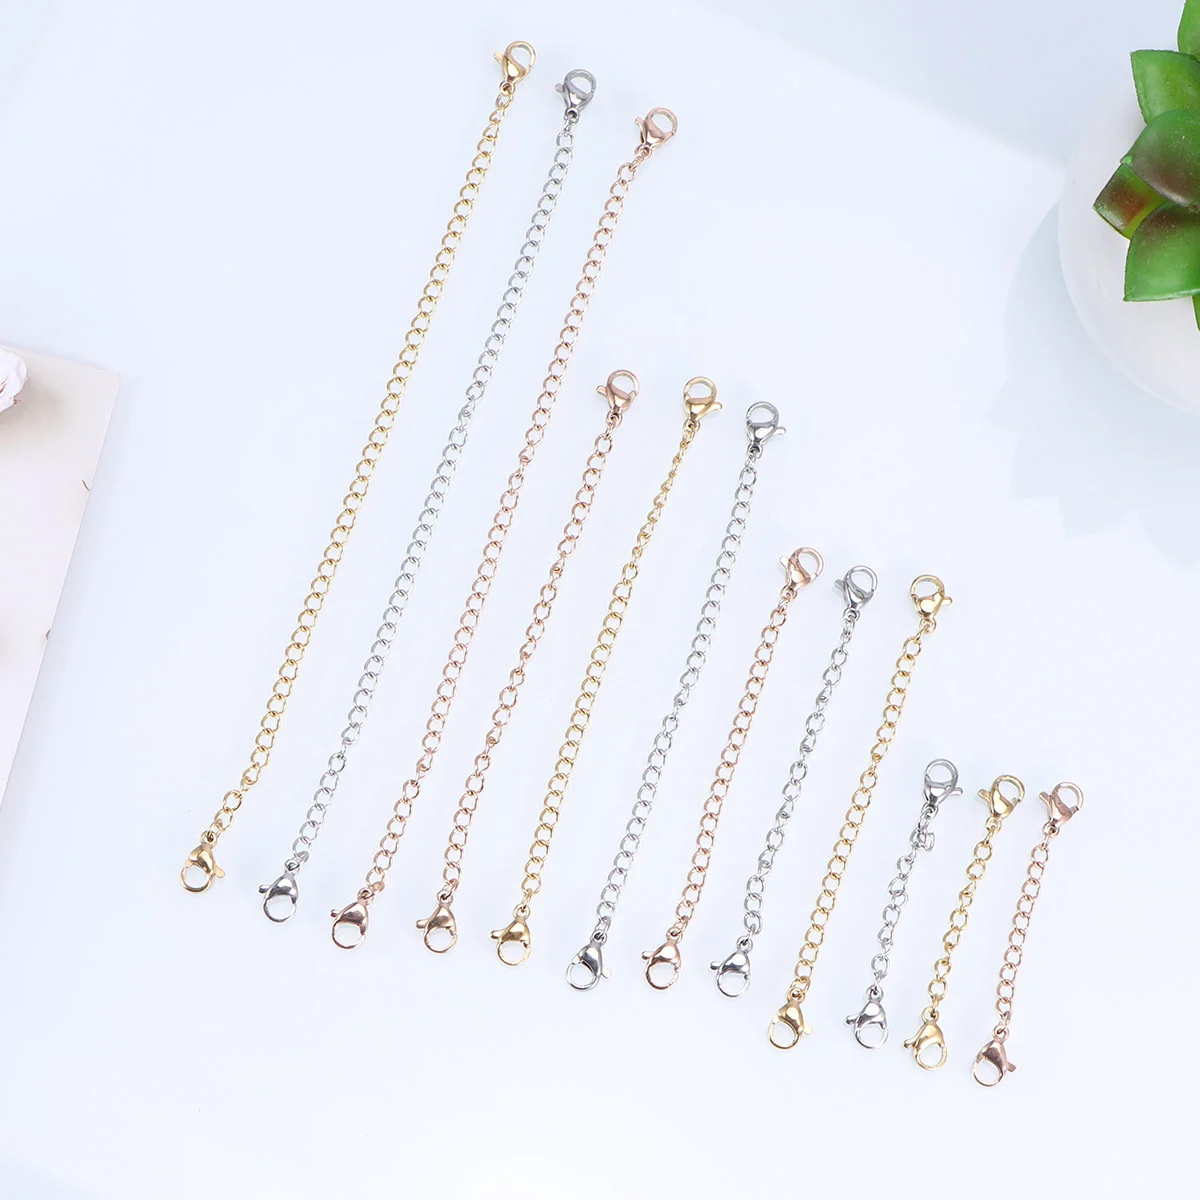 

12 PCS Rose Gold Necklace Women's The Chain with Lobster Clasp at Both Ends Necklace Extension